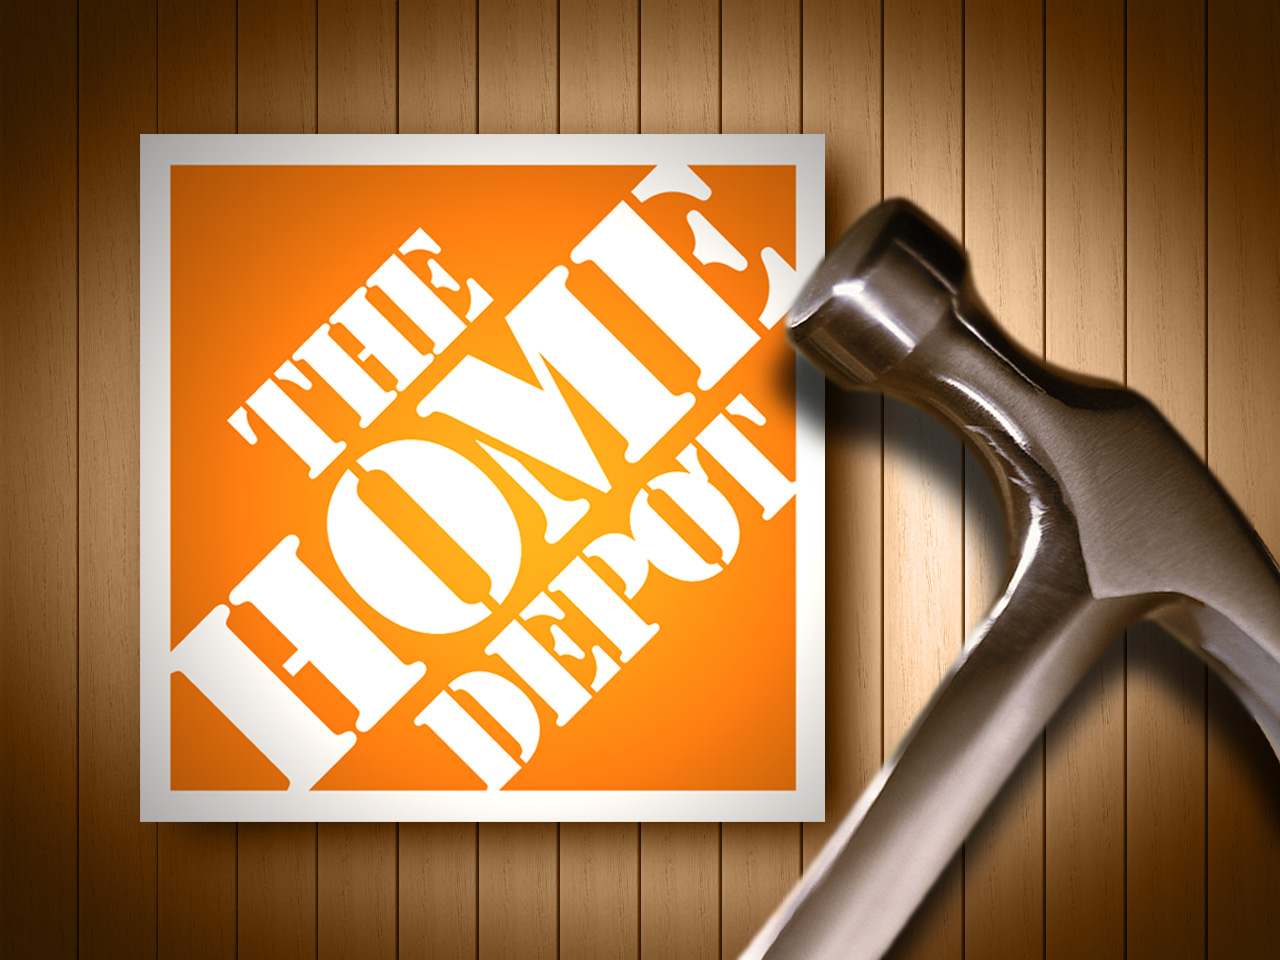 Home Depot laying off 225 more in Baton Rouge WBRZ News 2 Louisiana 1280x960